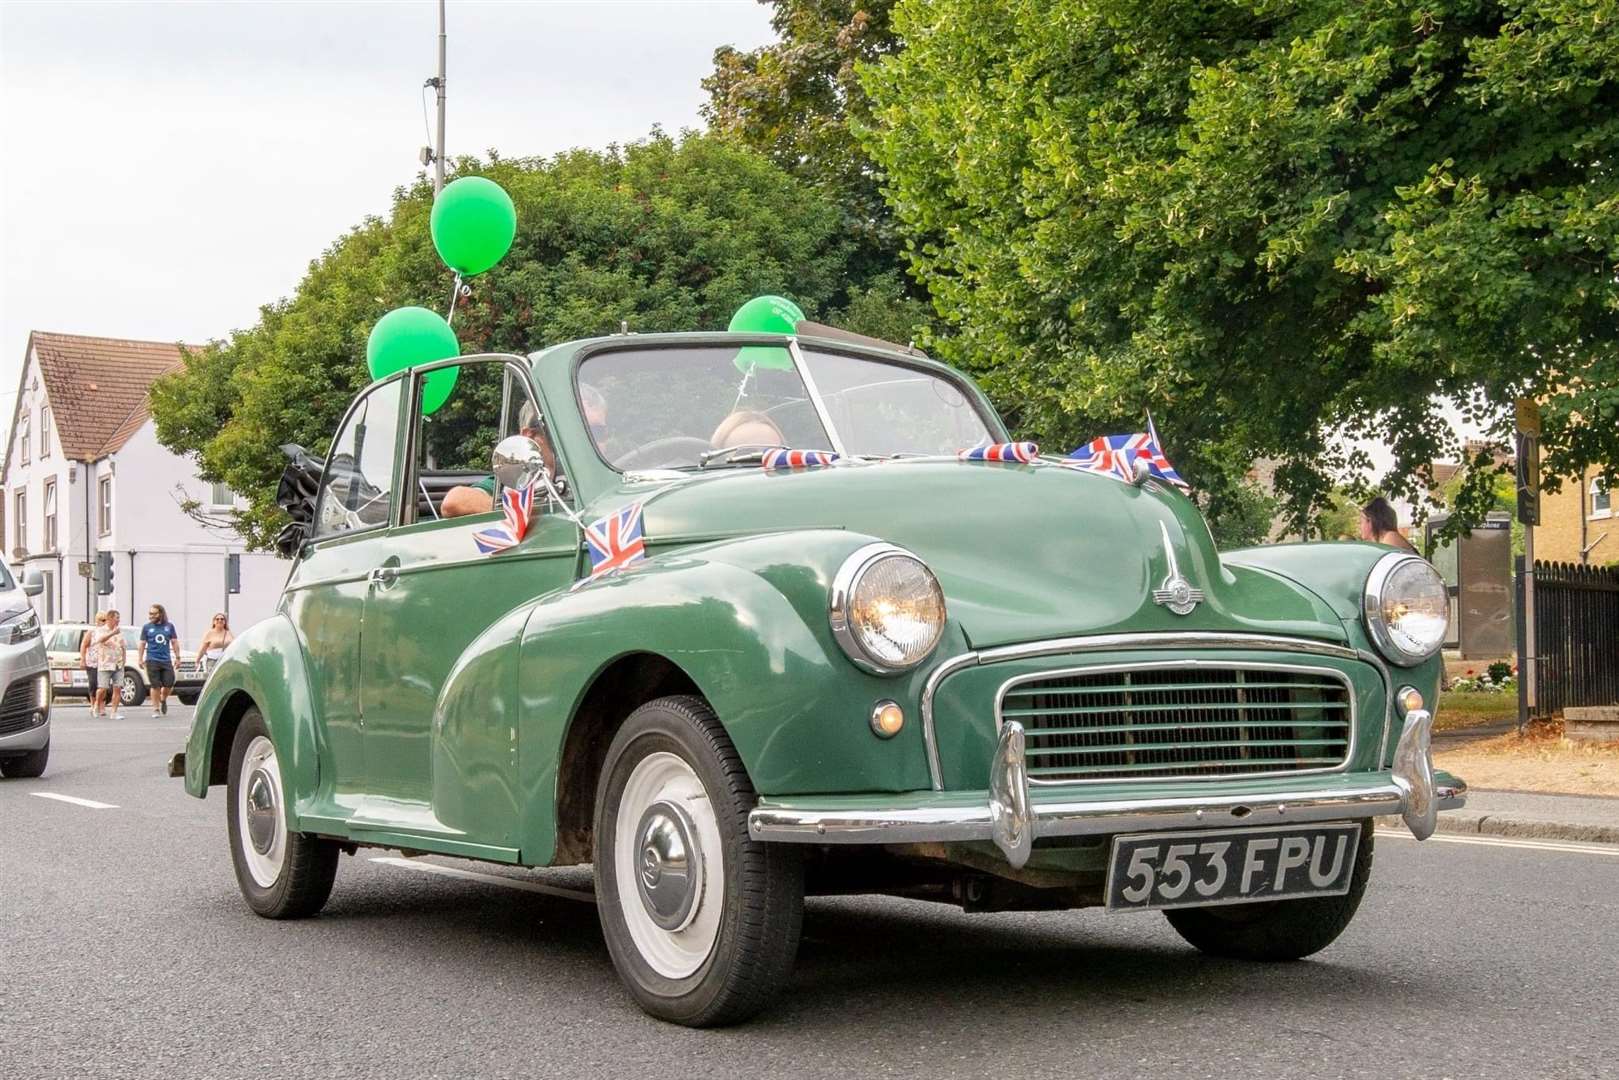 One of the classic cars in the procession, a Morris Minor. Picture: Susan Preston